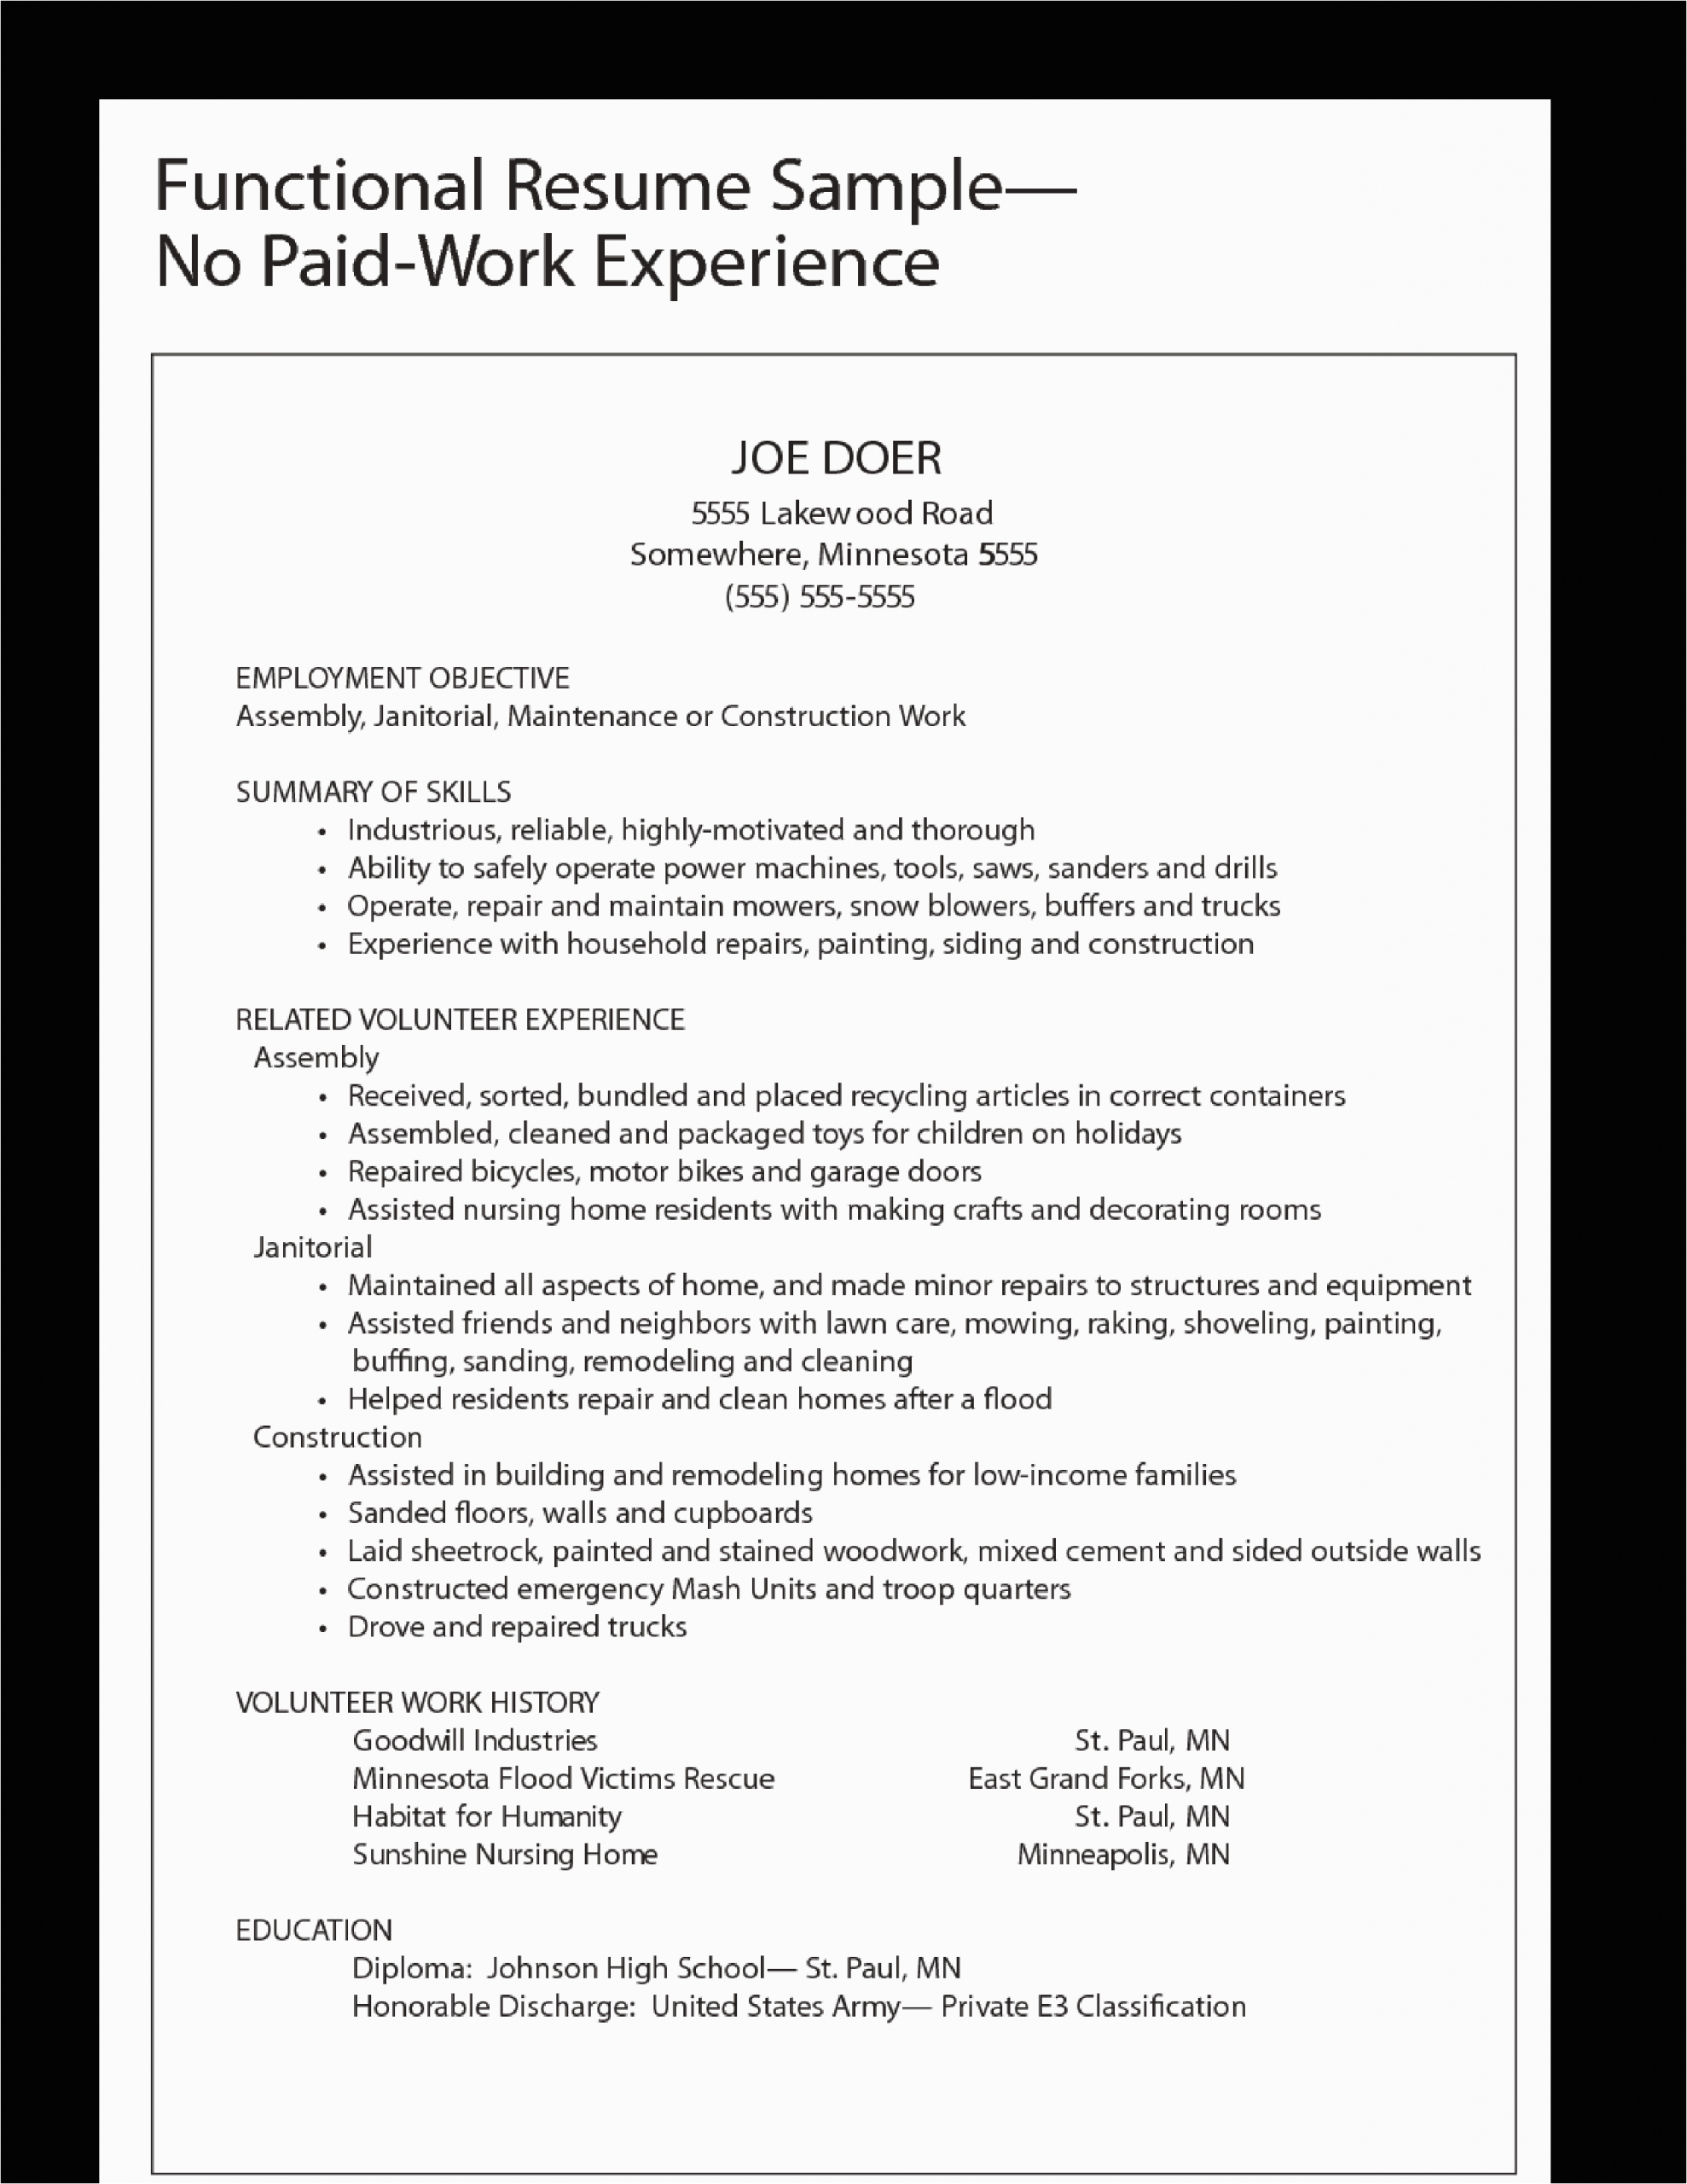 Resume Templates for Little Job Experience Functional Work Experience Resume Sample